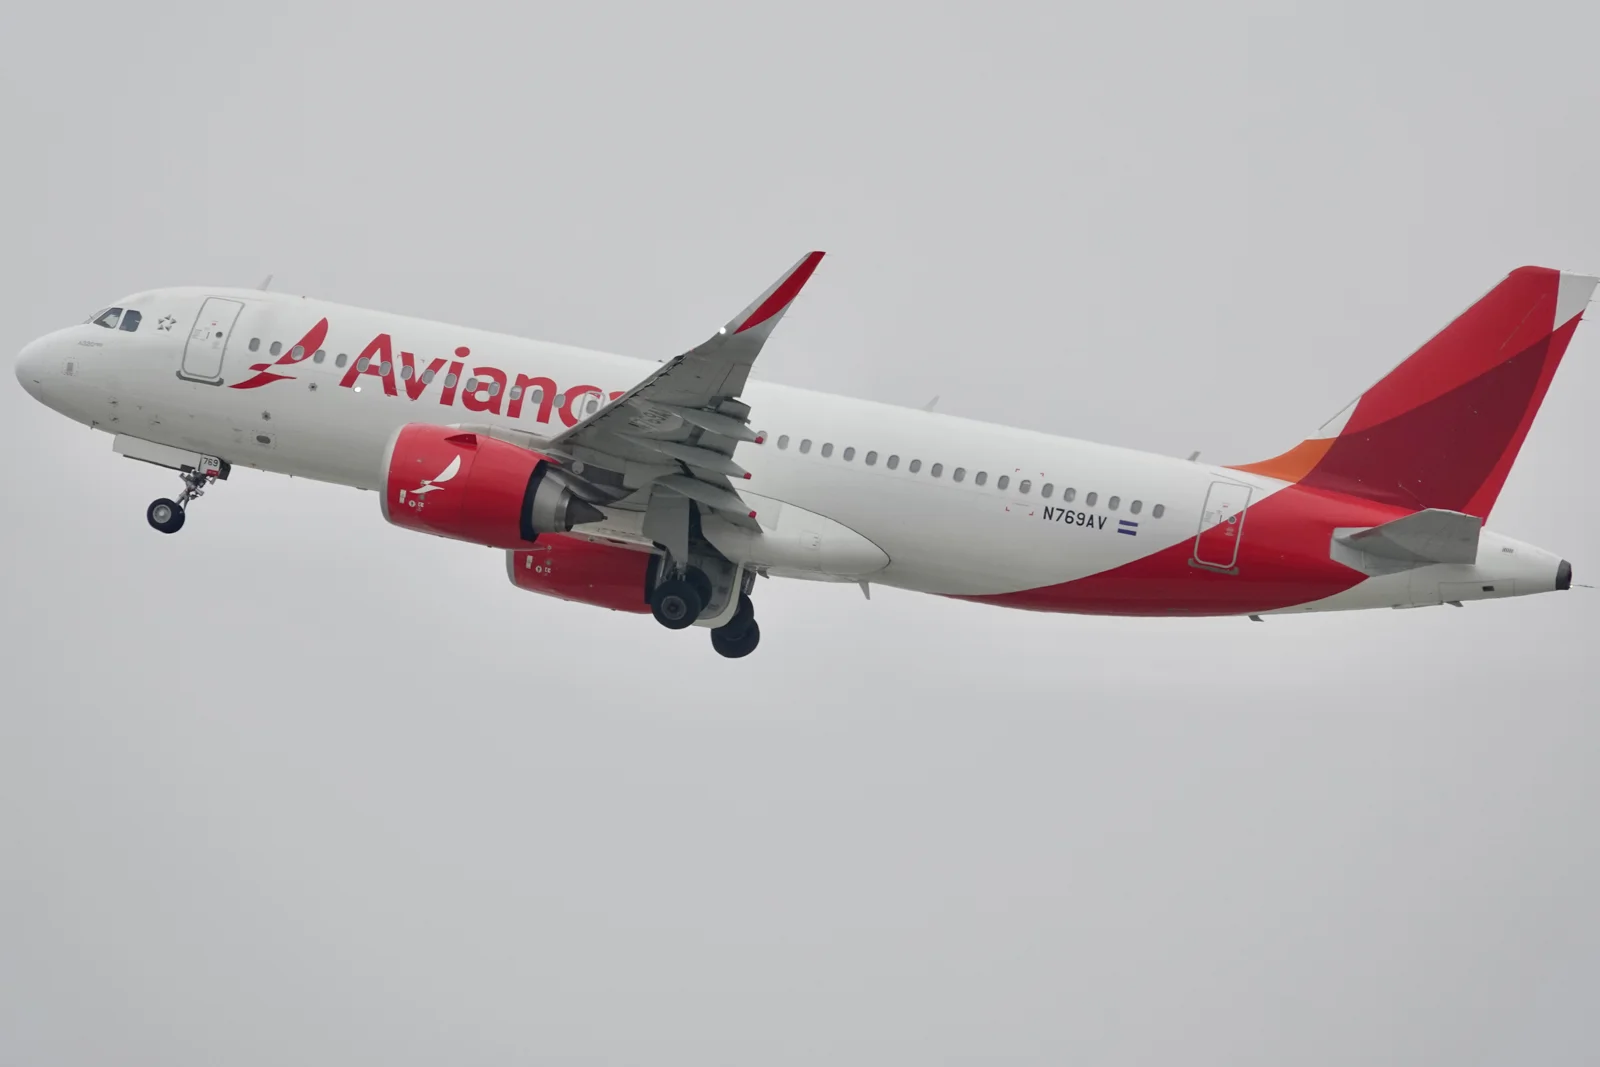 Is Avianca a good Airline? Here are some of the reasons